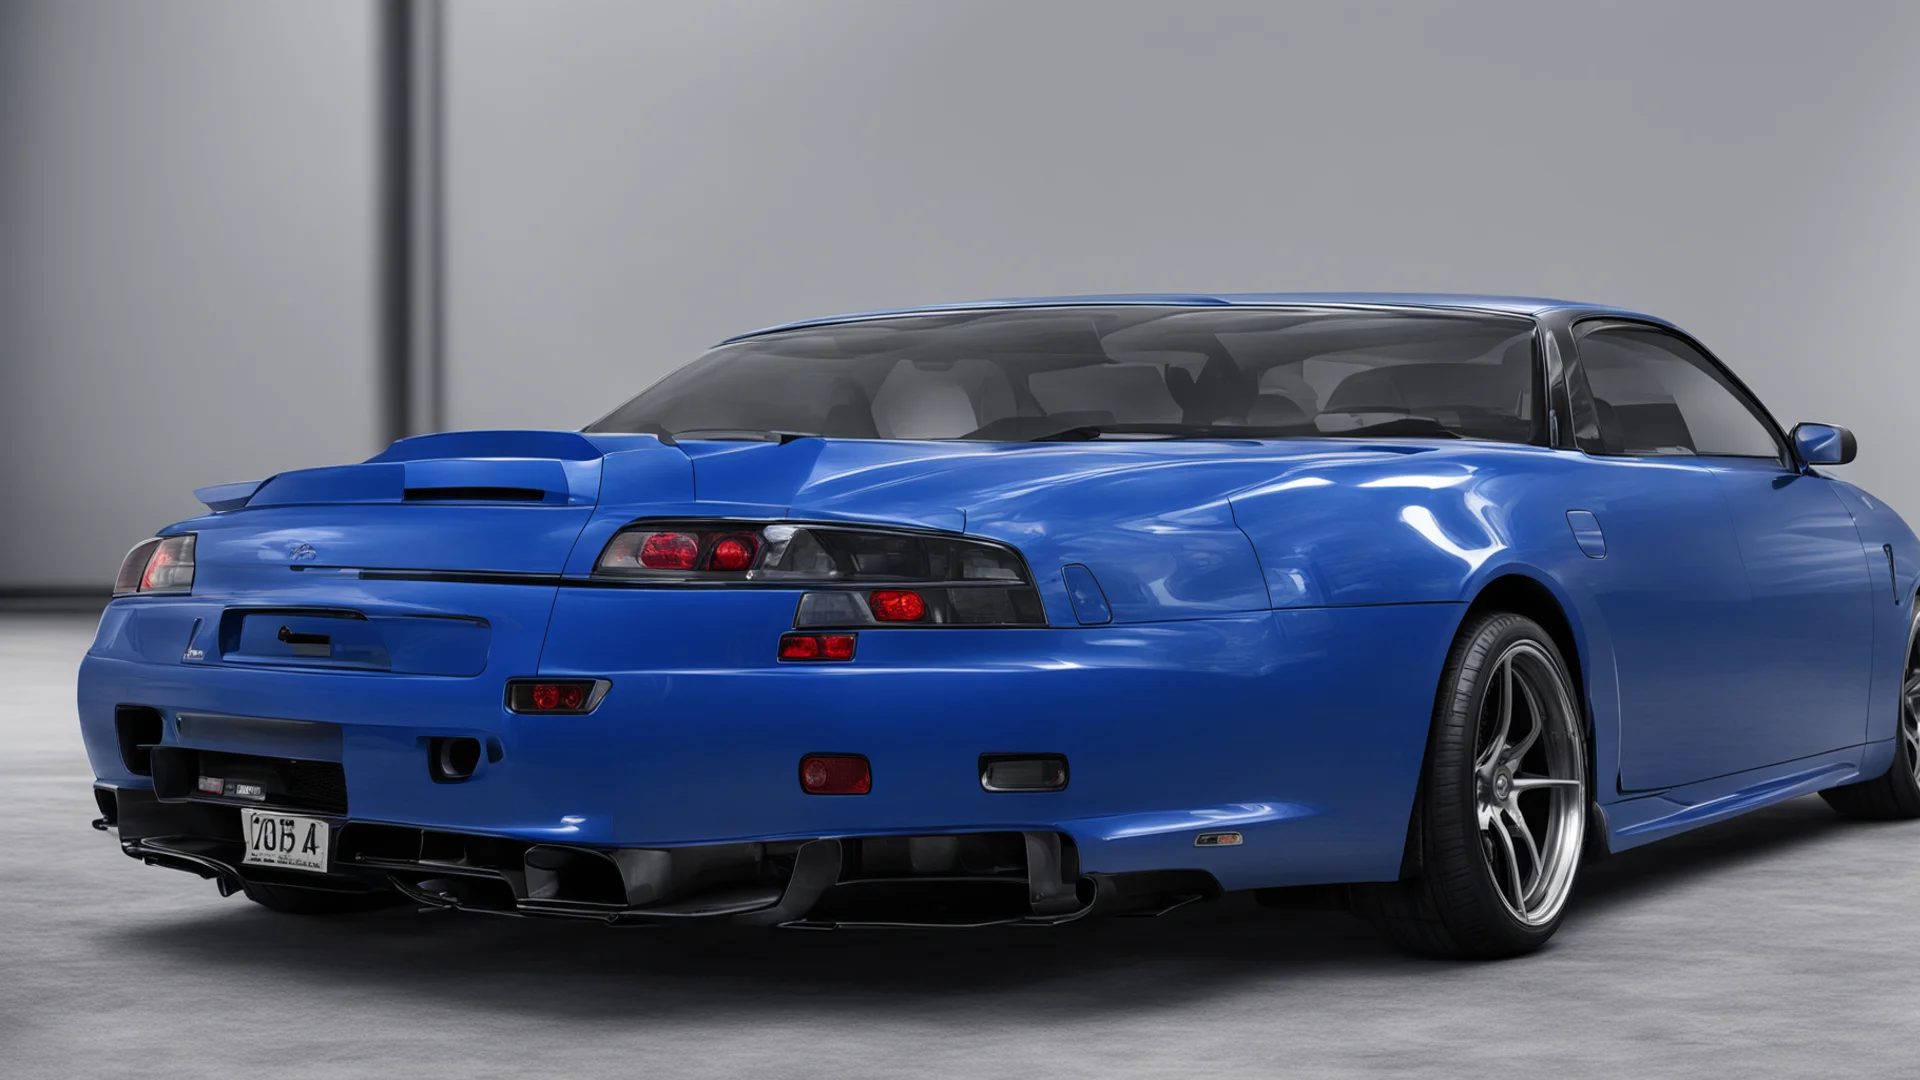 aiamazing blue r34 nissan skyline from behind awesome portrait 2 wide